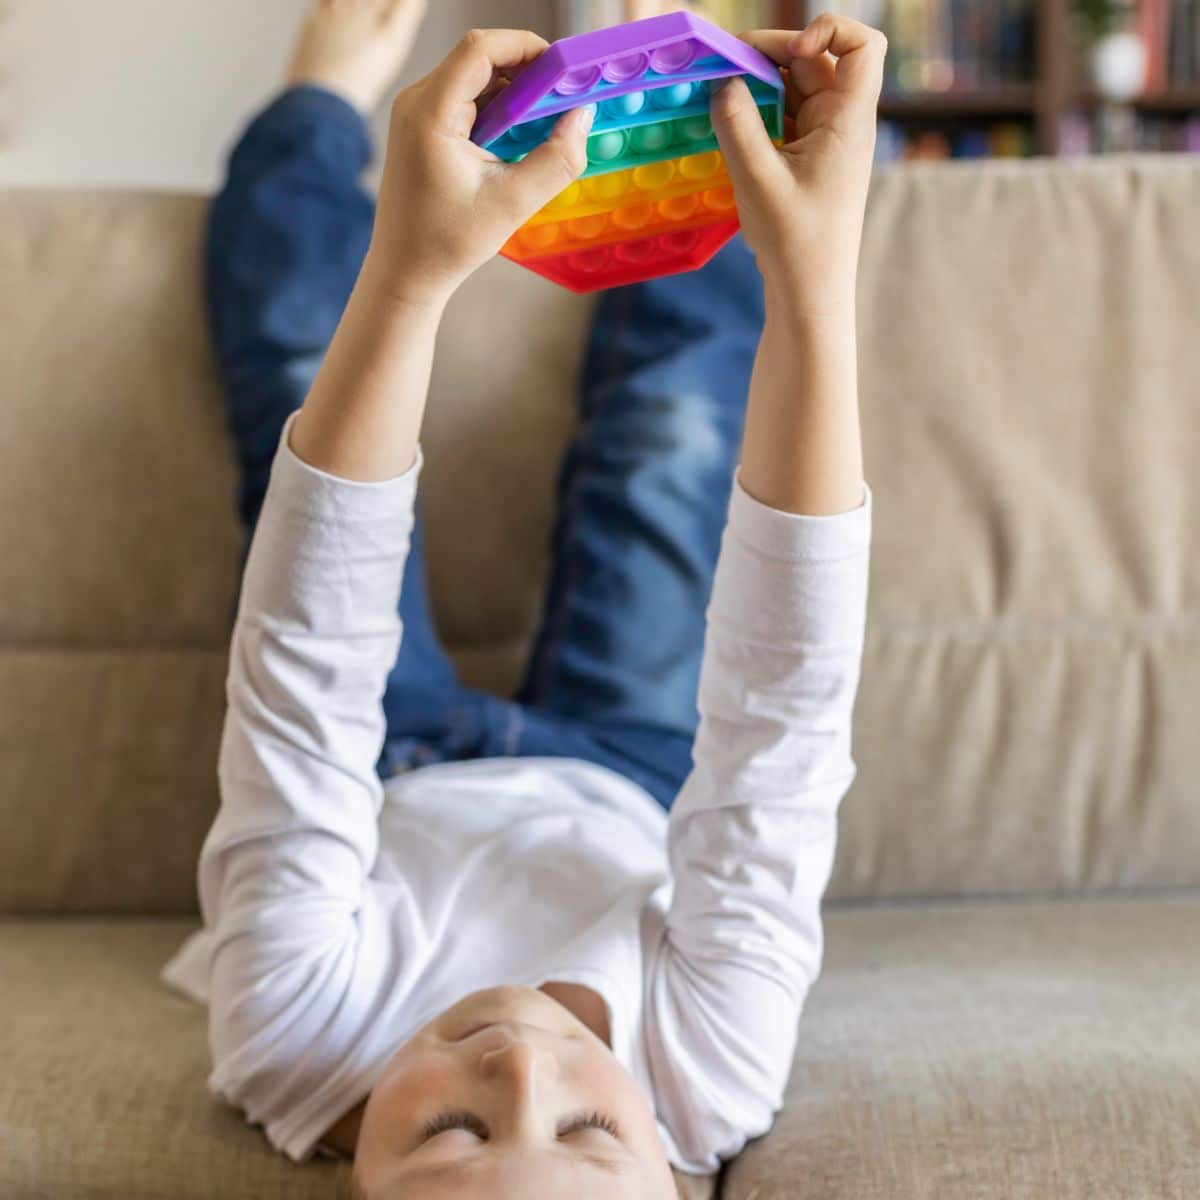 Our Best Toys to Help Your Child Manage ADHD in School